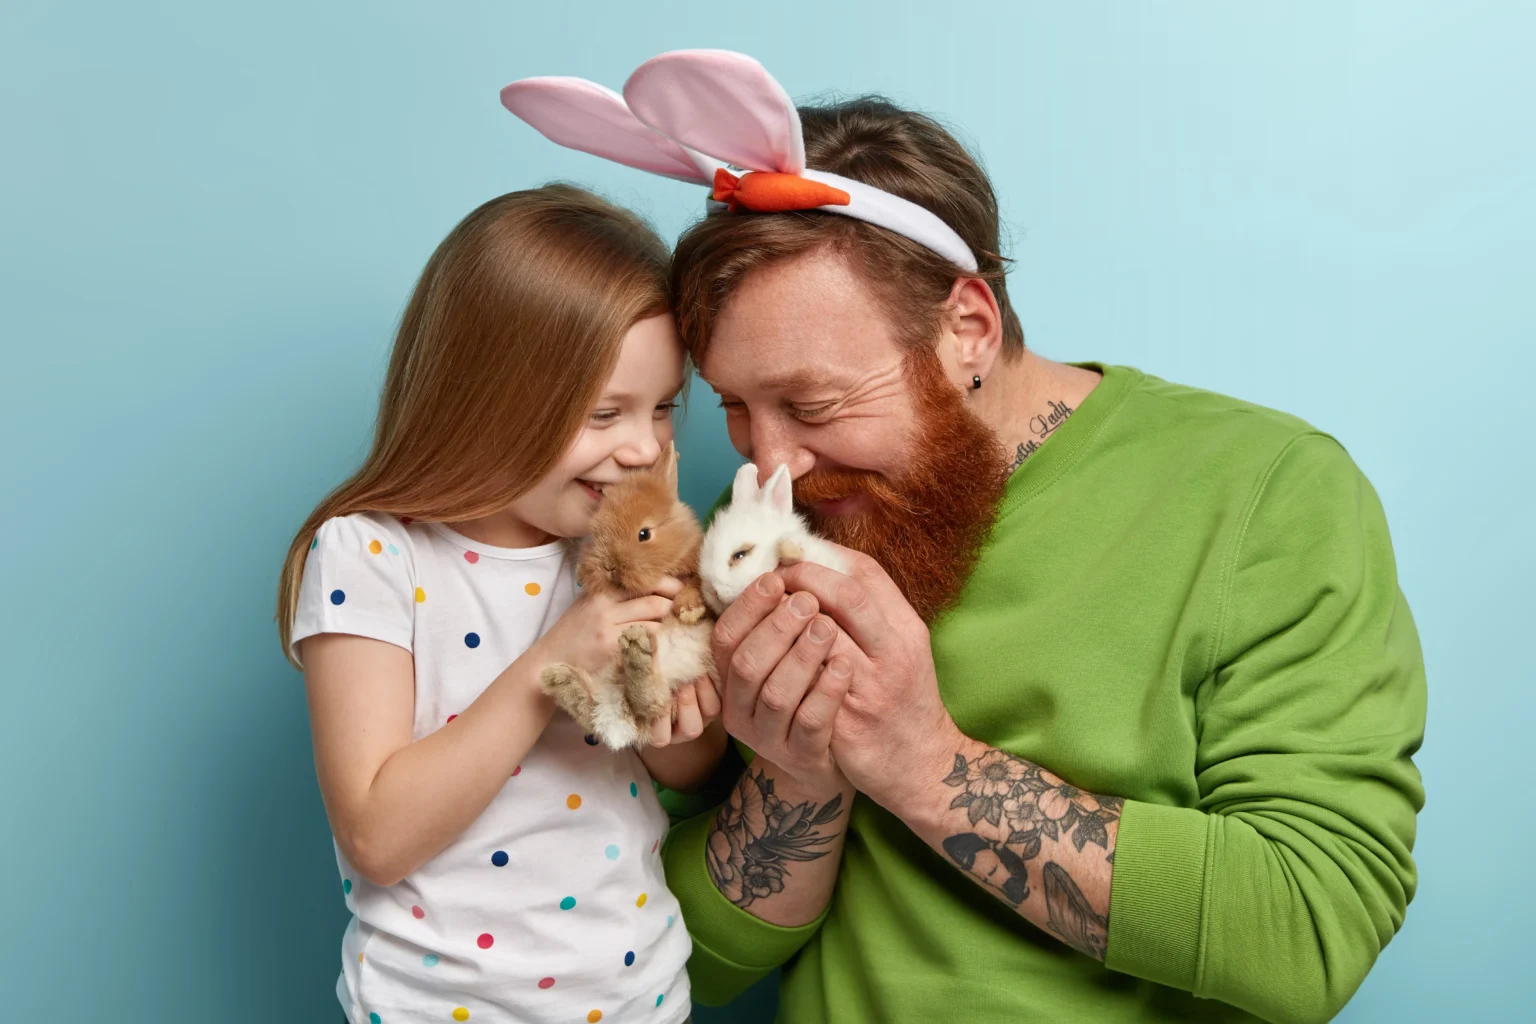 man with ginger beard wearing colorful clothes his daughter holding rabbit ezgif.com optiwebp